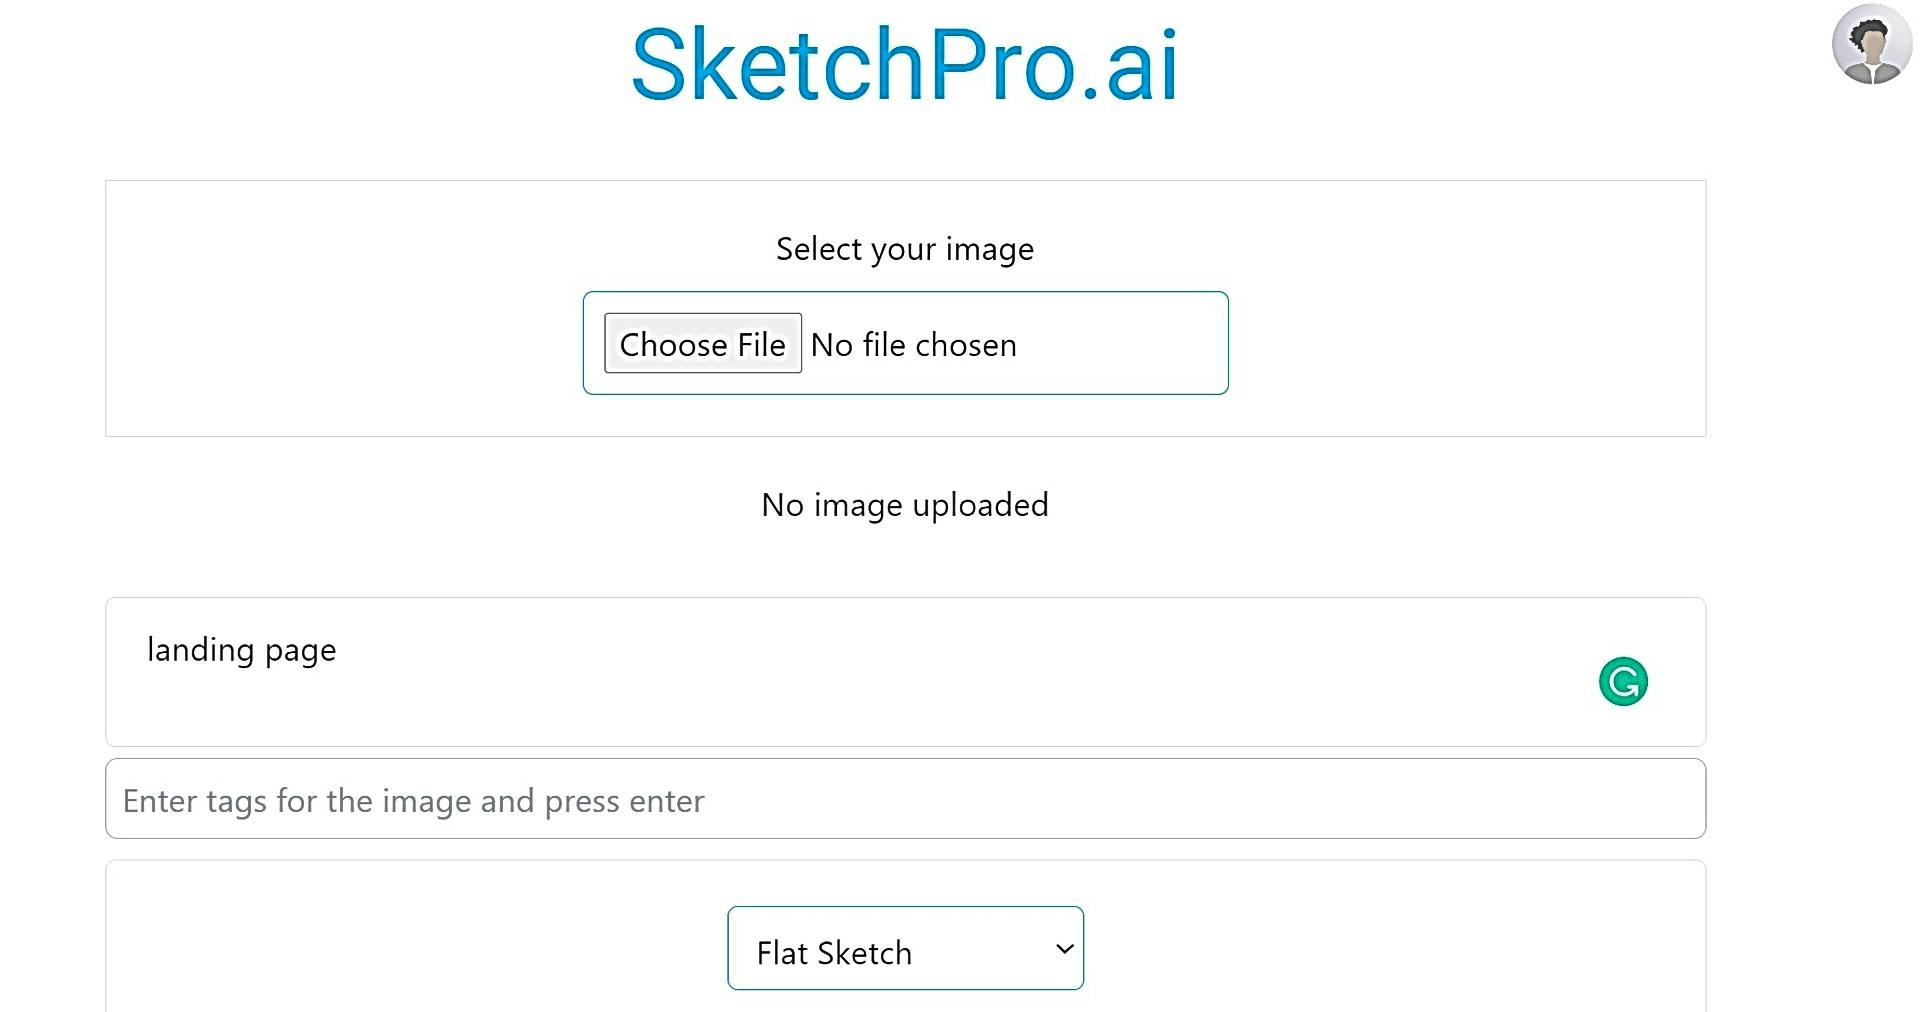 SketchPro AI featured